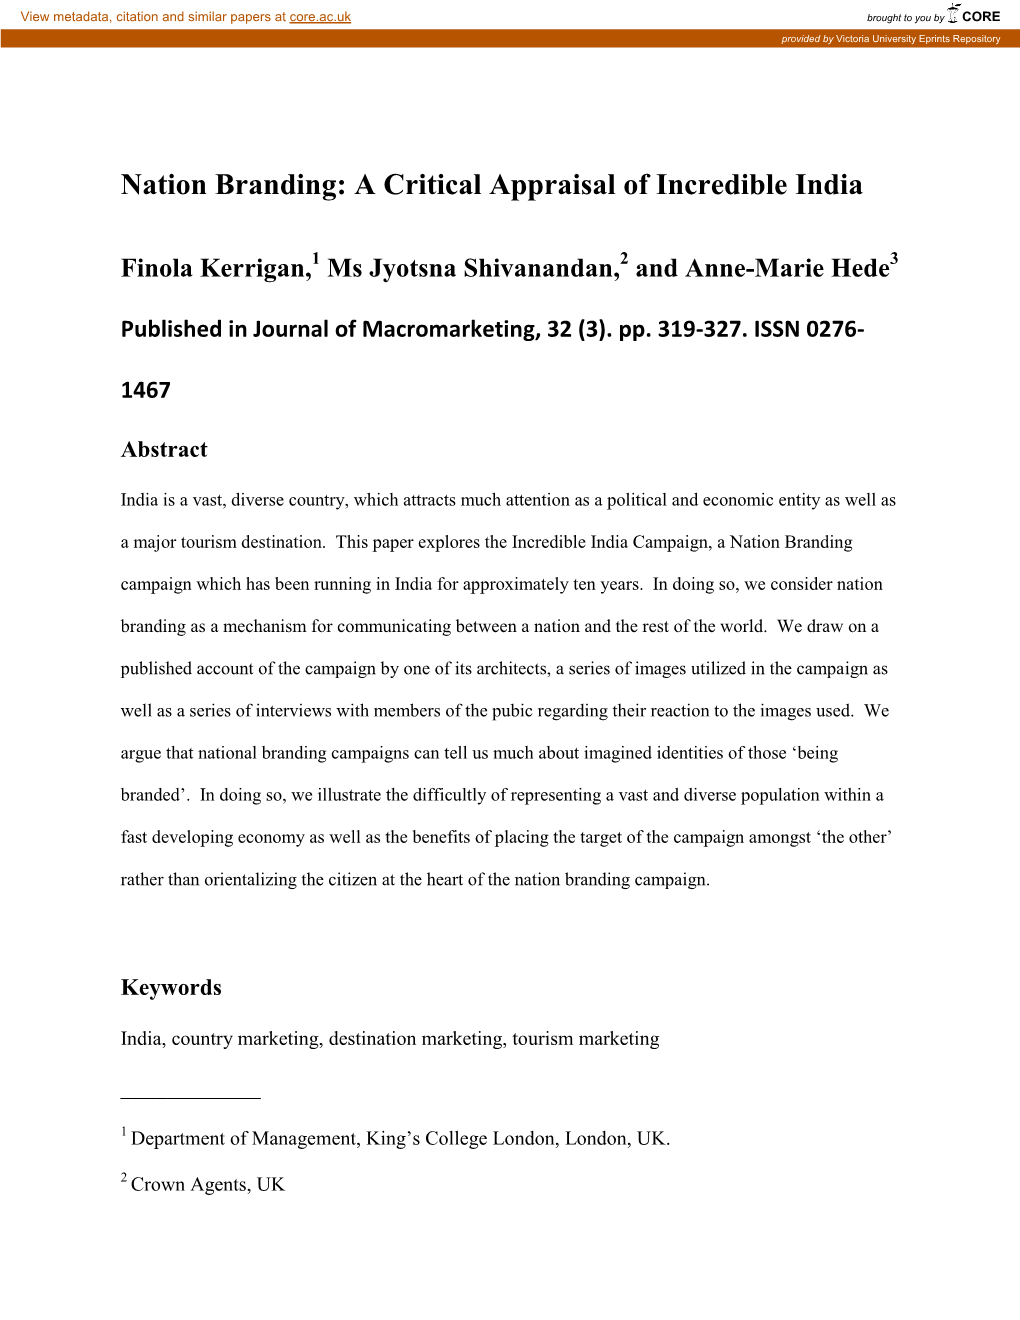 Nation Branding: a Critical Appraisal of Incredible India